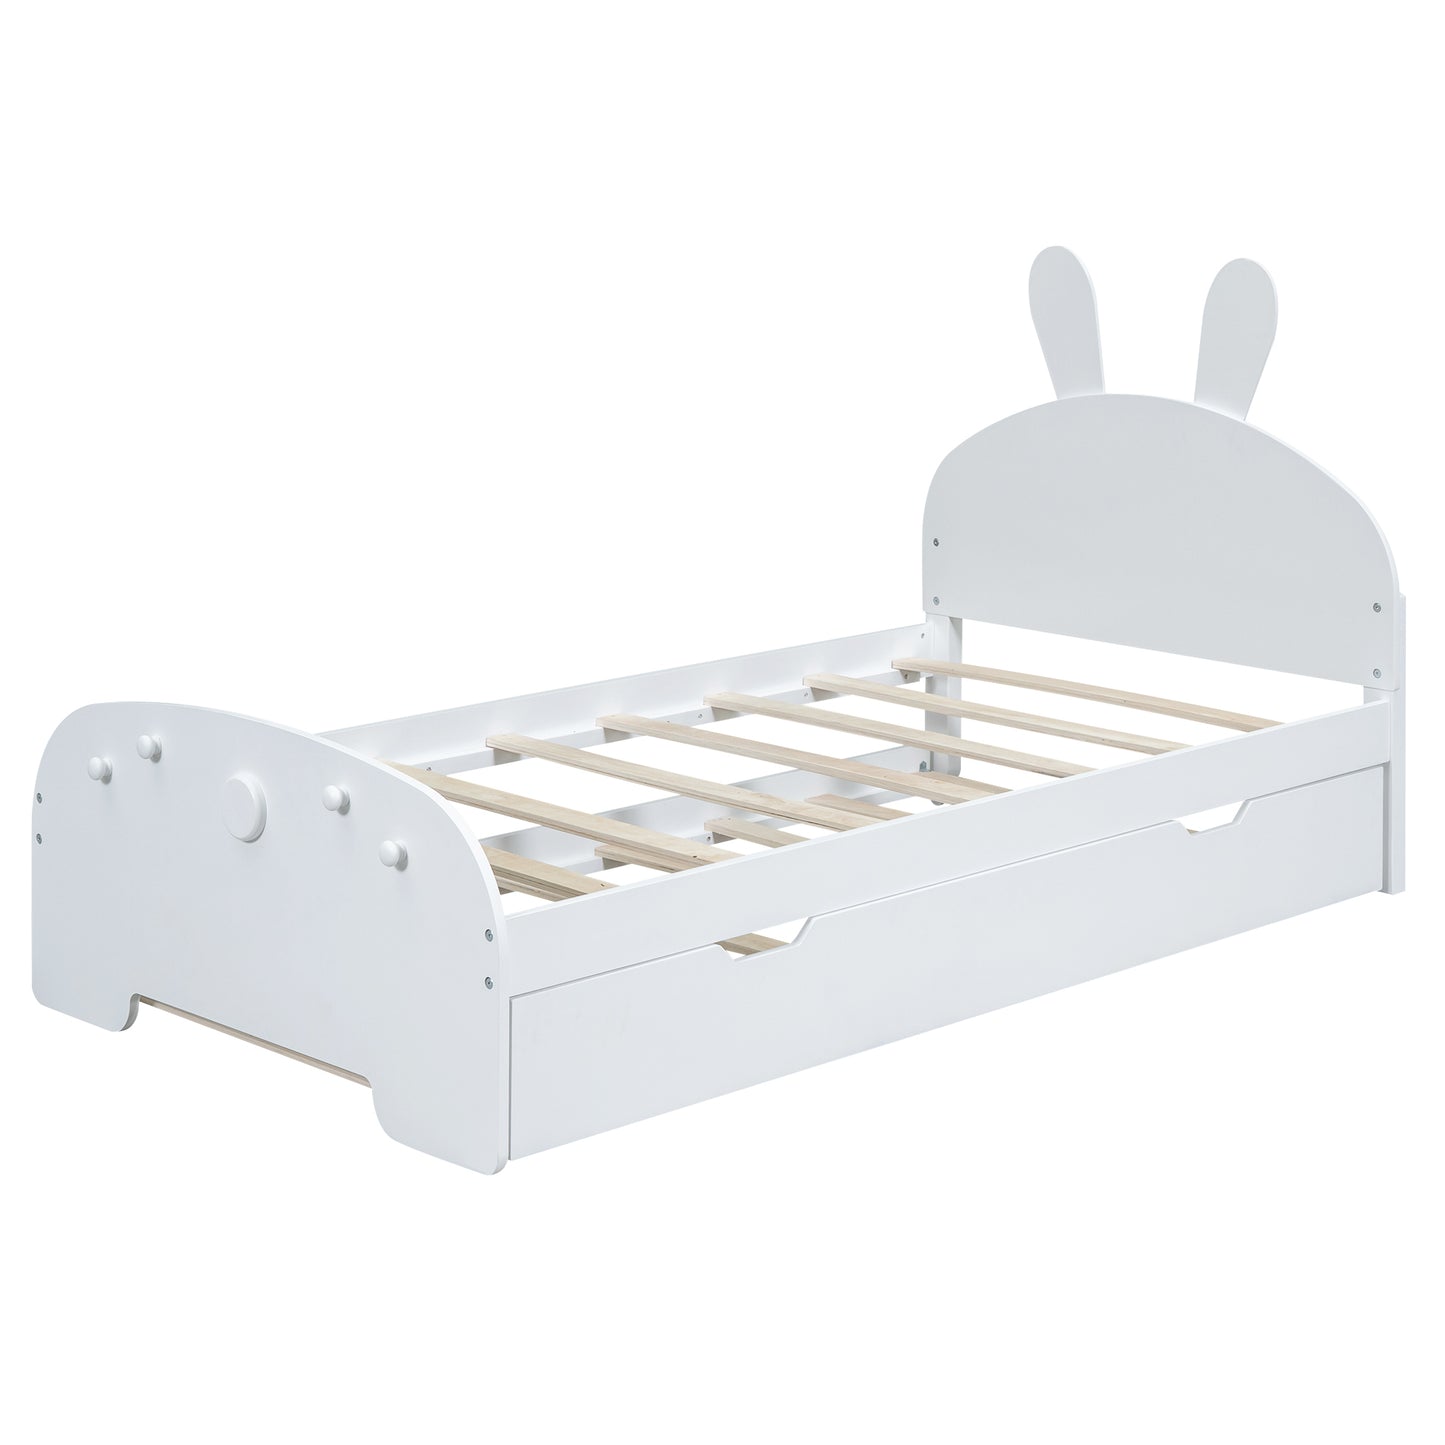 Wood Twin Size Platform Bed with Cartoon Ears Shaped Headboard and Trundle, White